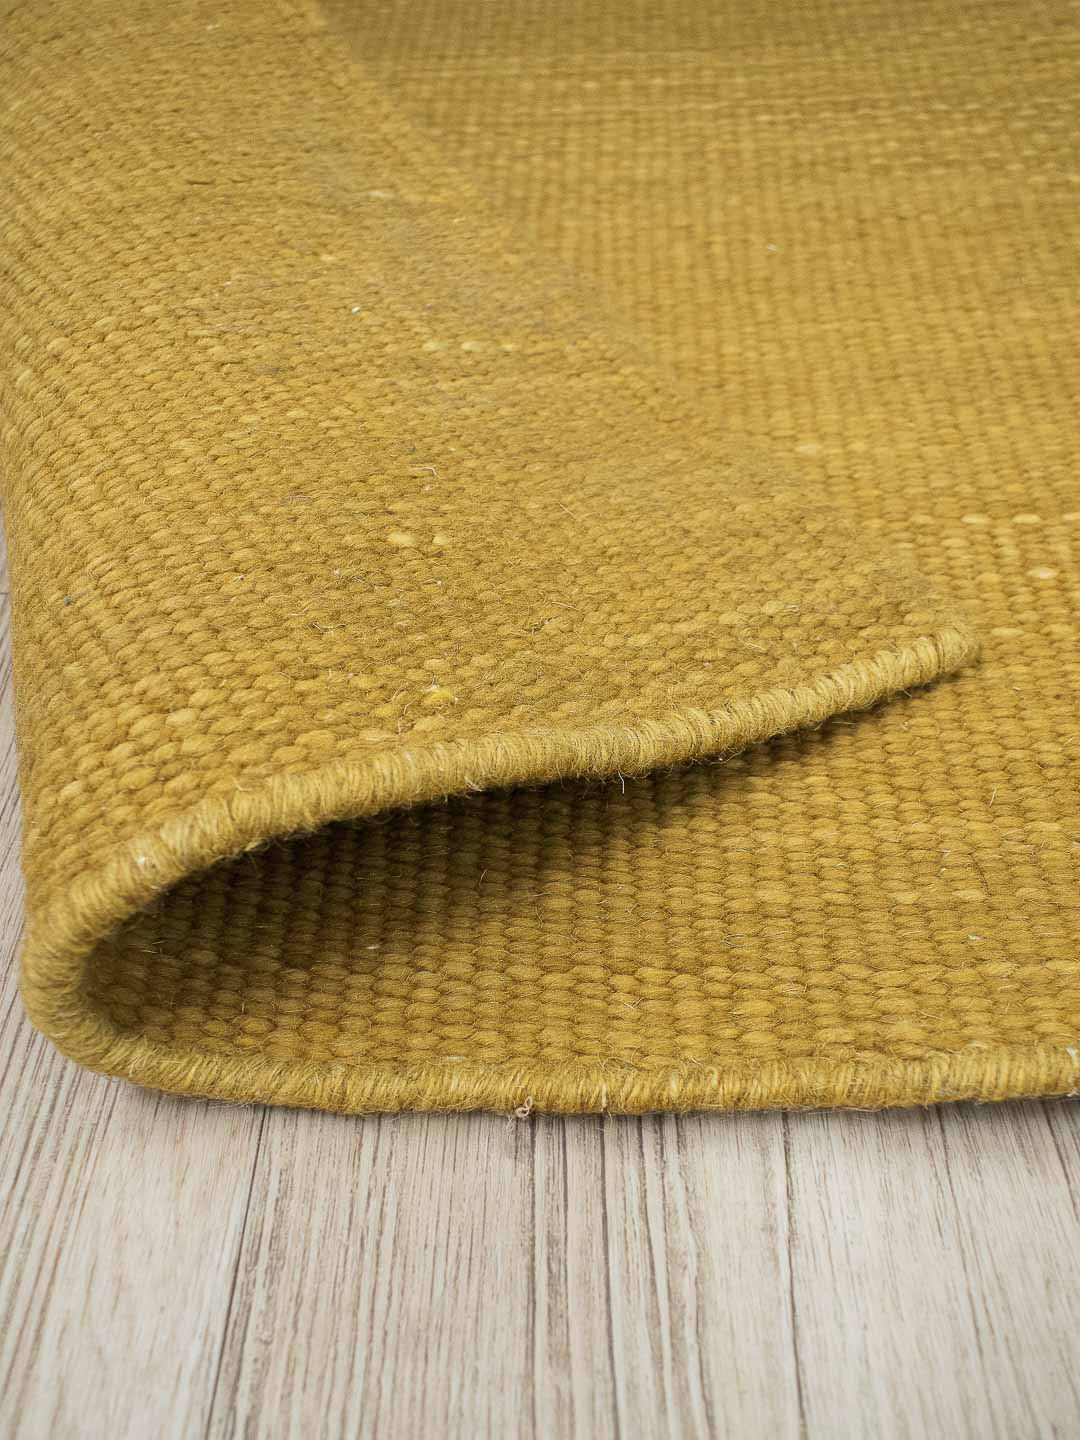 Yarra Rug Mustard is 20% off from the Rug Collection Stockist Make Your House A Home, Furniture Store Bendigo. Free Australia Wide Delivery